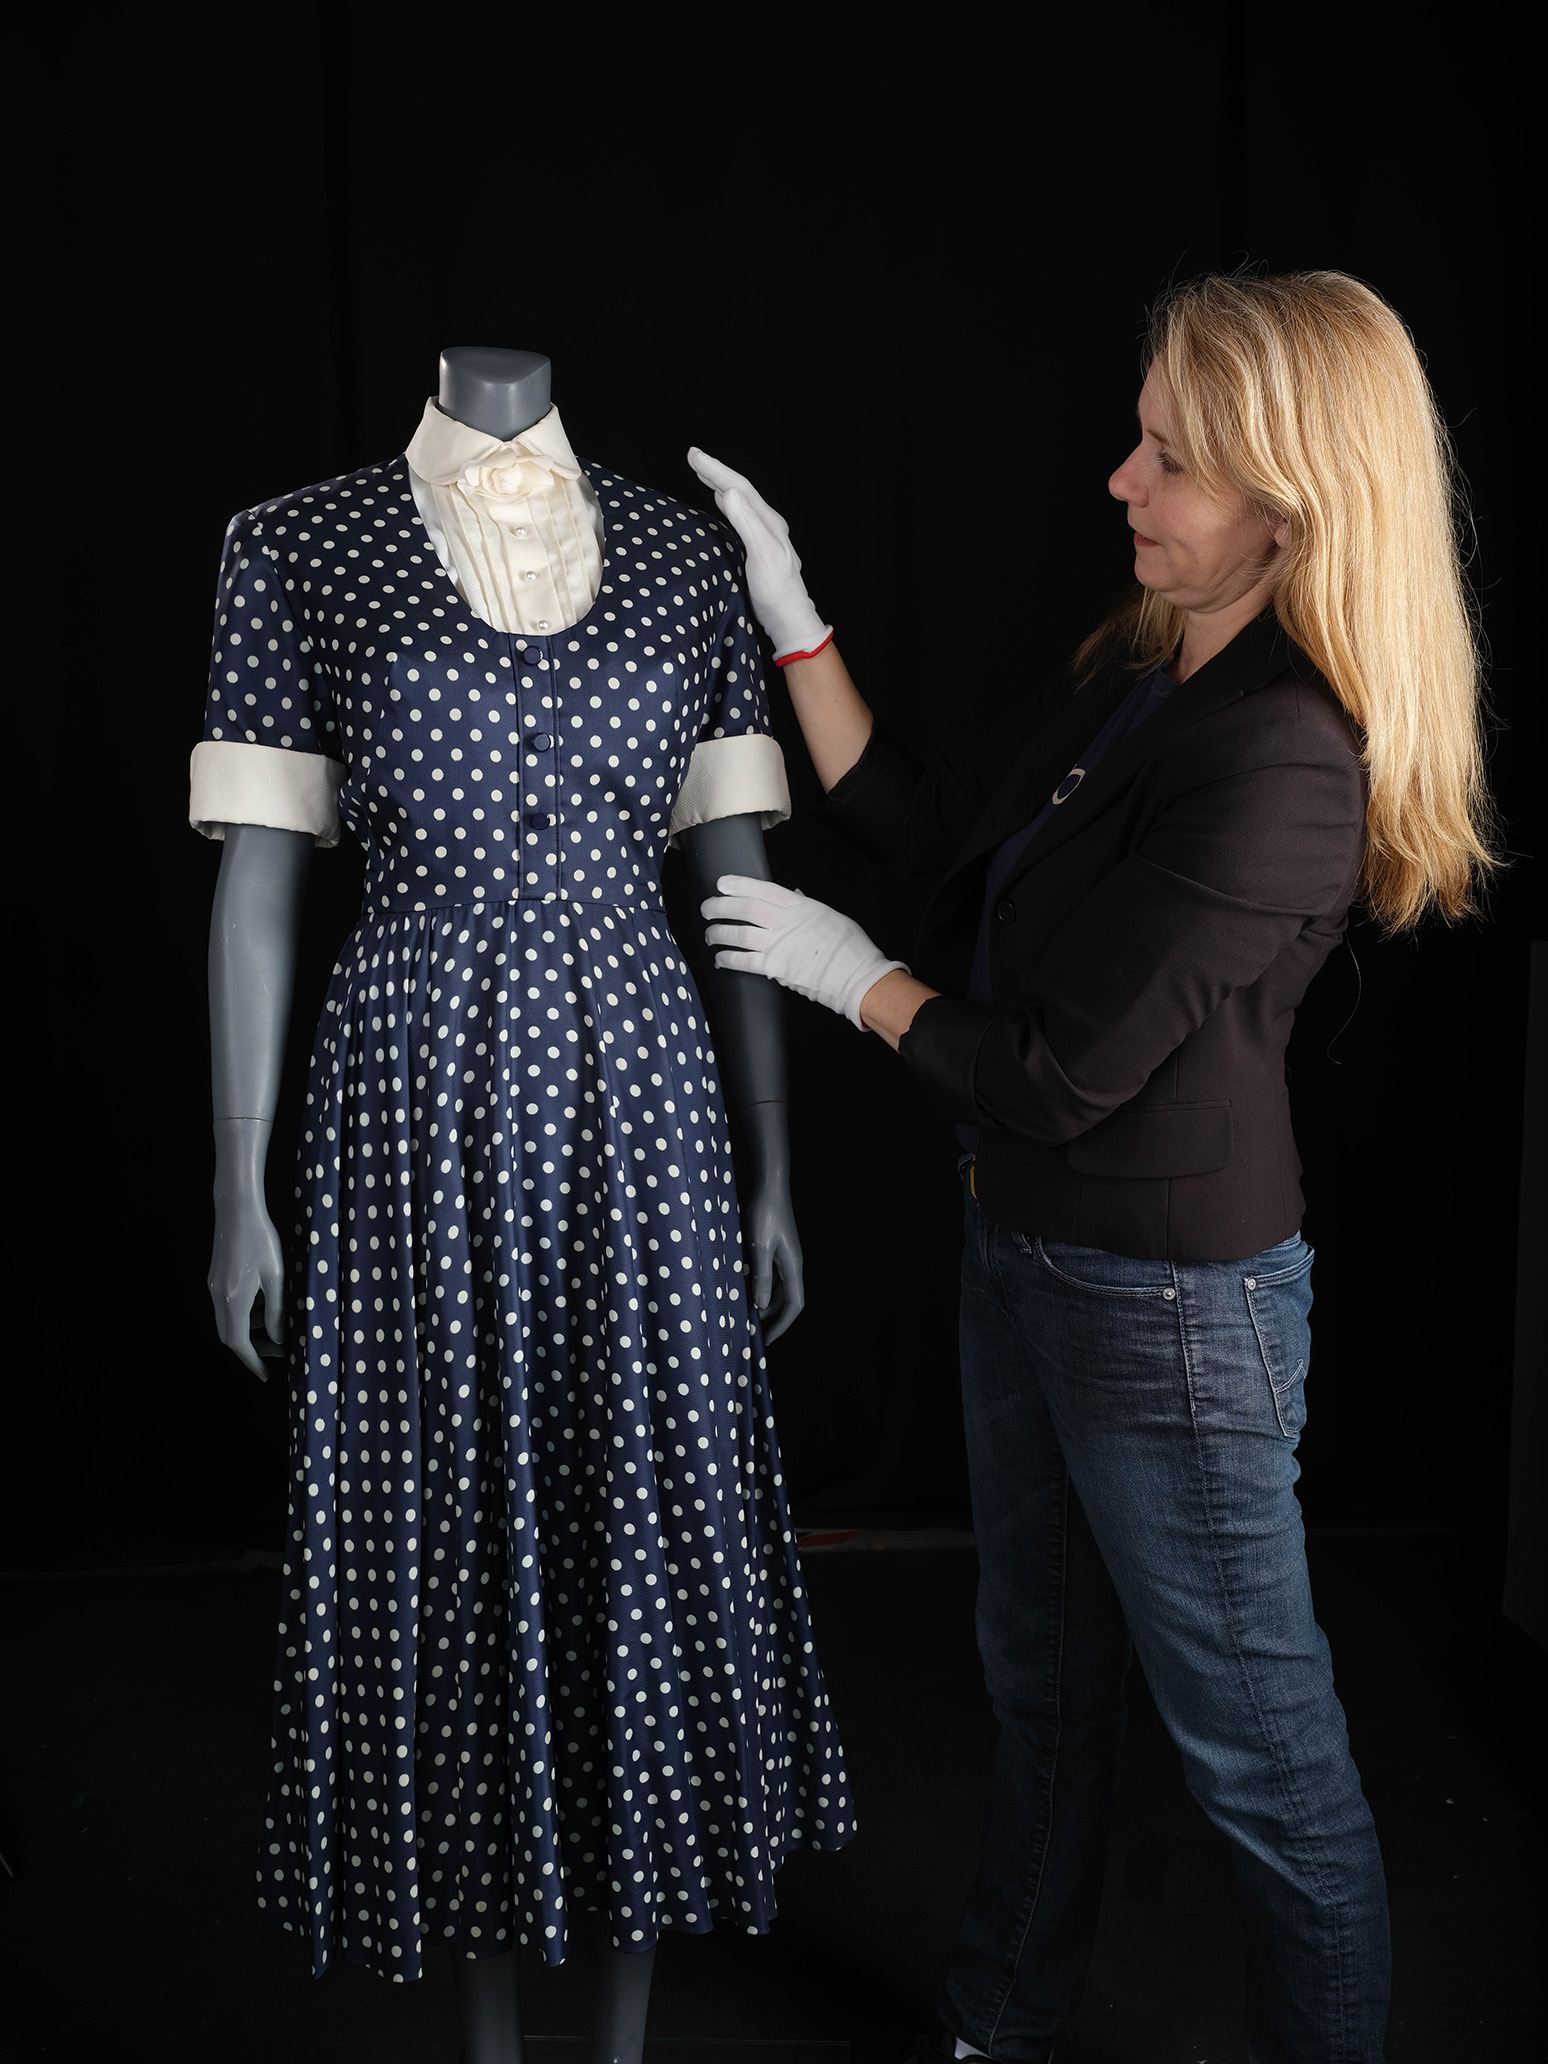 I LOVE LUCY (1951-1957) Lucy Ricardo's (Lucille Ball) Dress